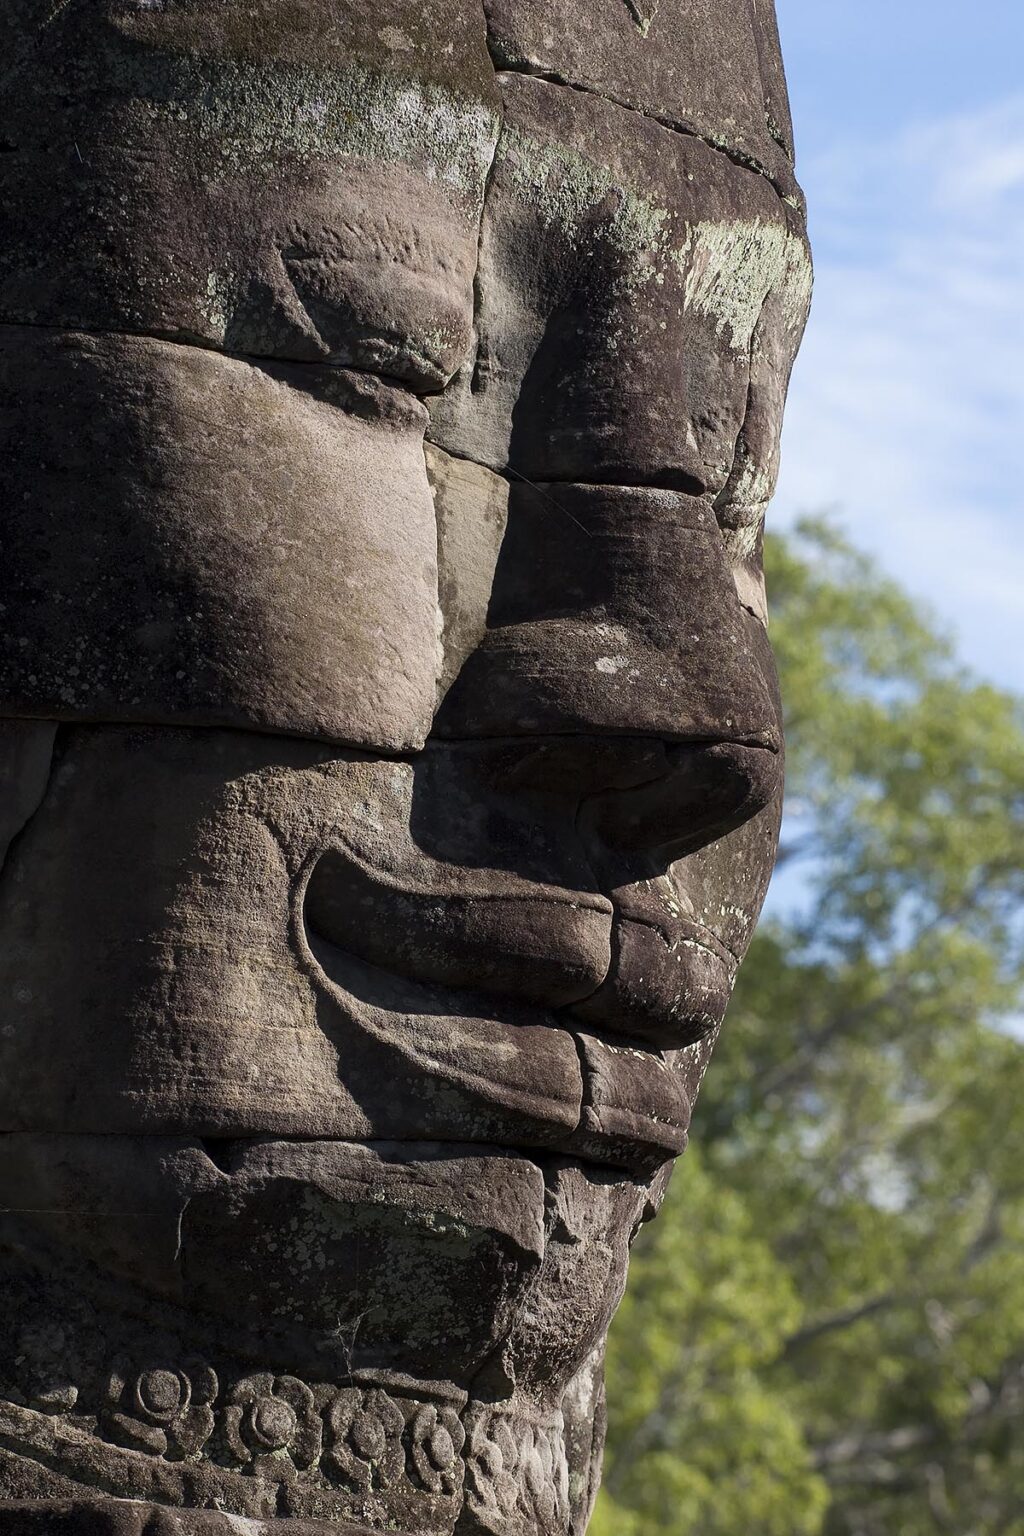 A close_up of a  face tower of The Bayon at Angkor Thom, the largest Khmer city ever built, are part of the Angkor Wat complex - Siem Reap, Cambodia